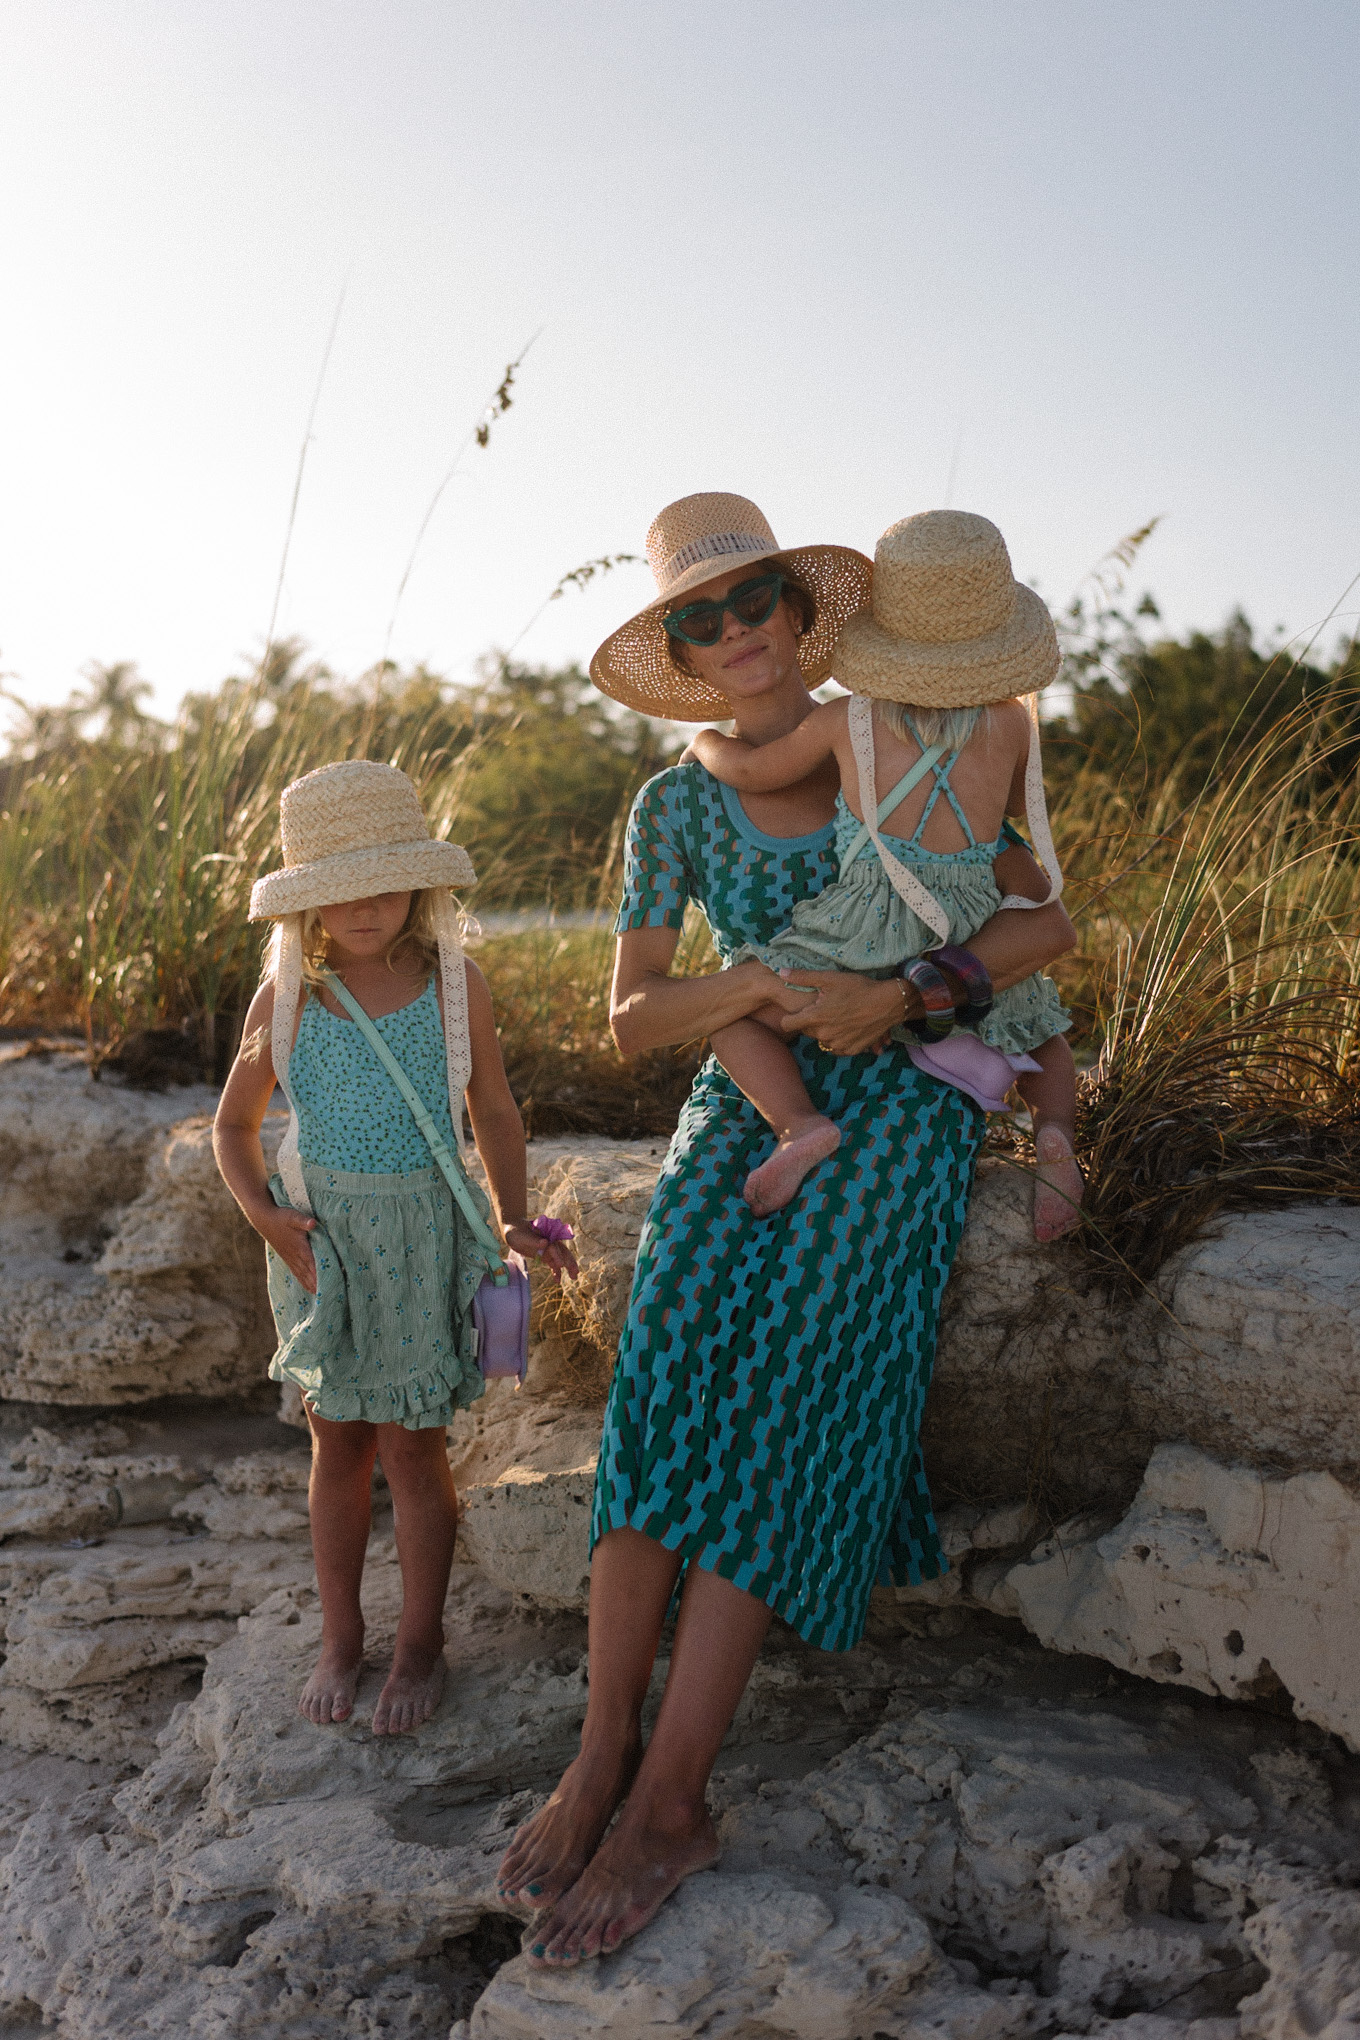 Turquoise Green Crochet Cover-Up Straw Hat